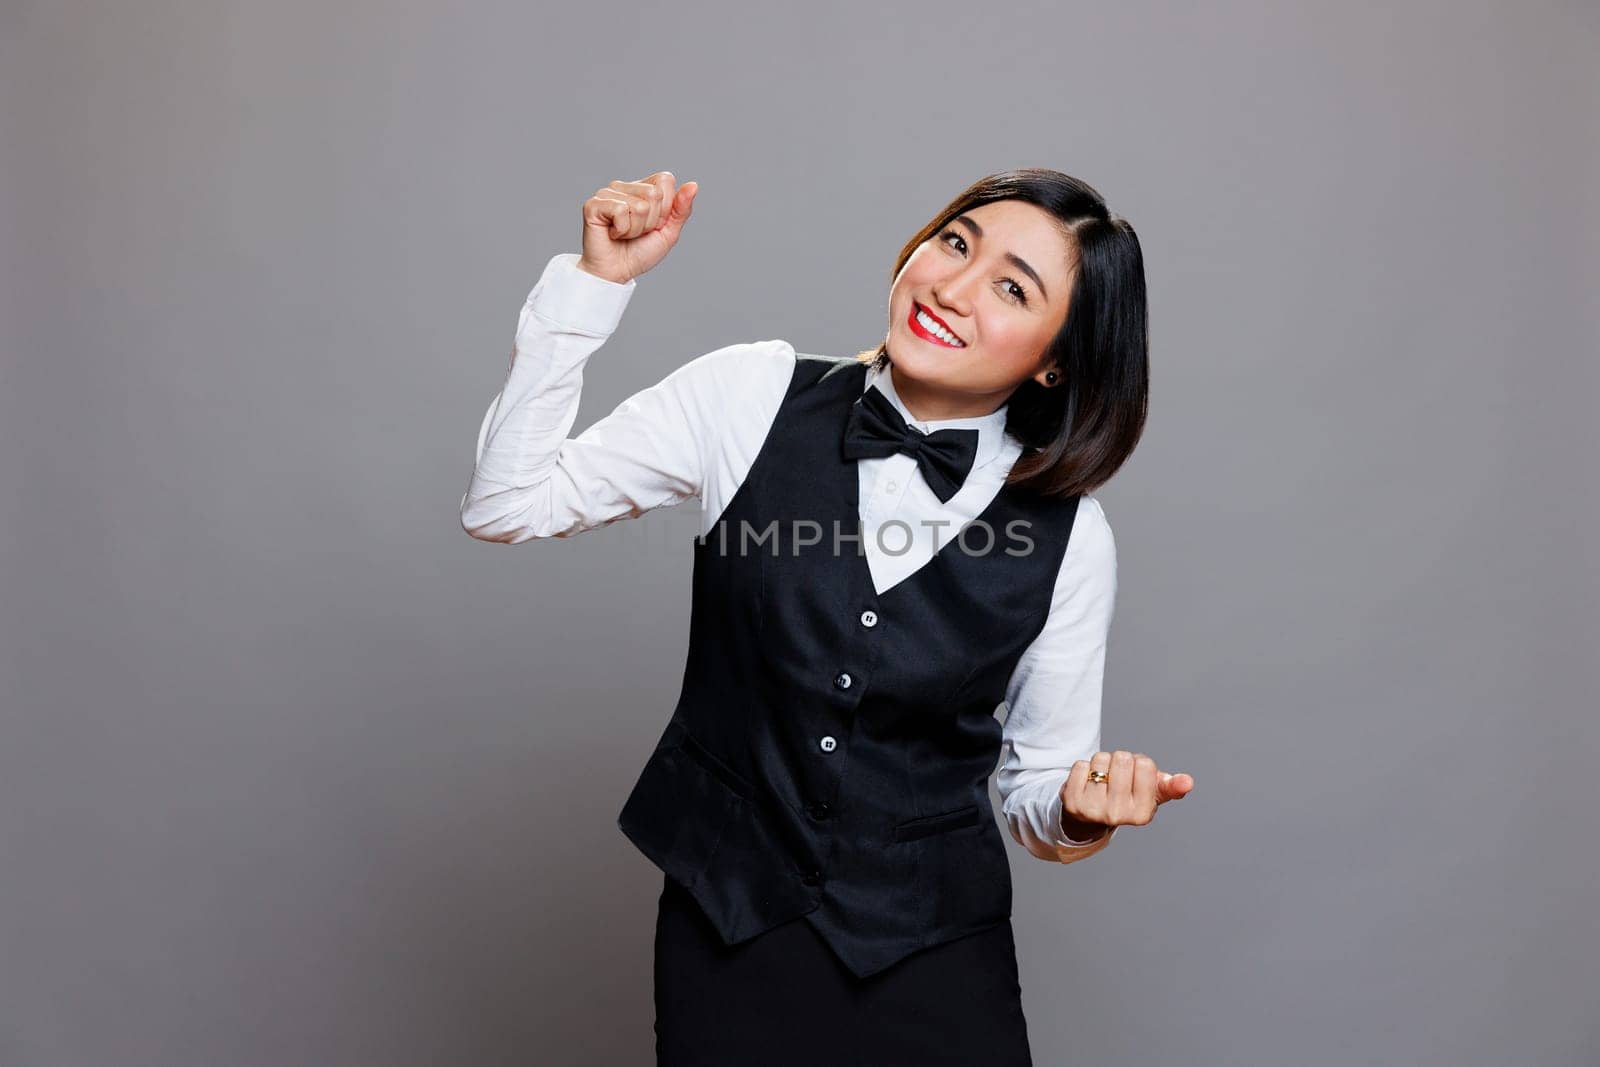 Cafeteria happy waitress wearing black and white professional uniform laughing while dancing. Cheerful young woman receptionist relaxing and having fun, moving arms to music rhythm